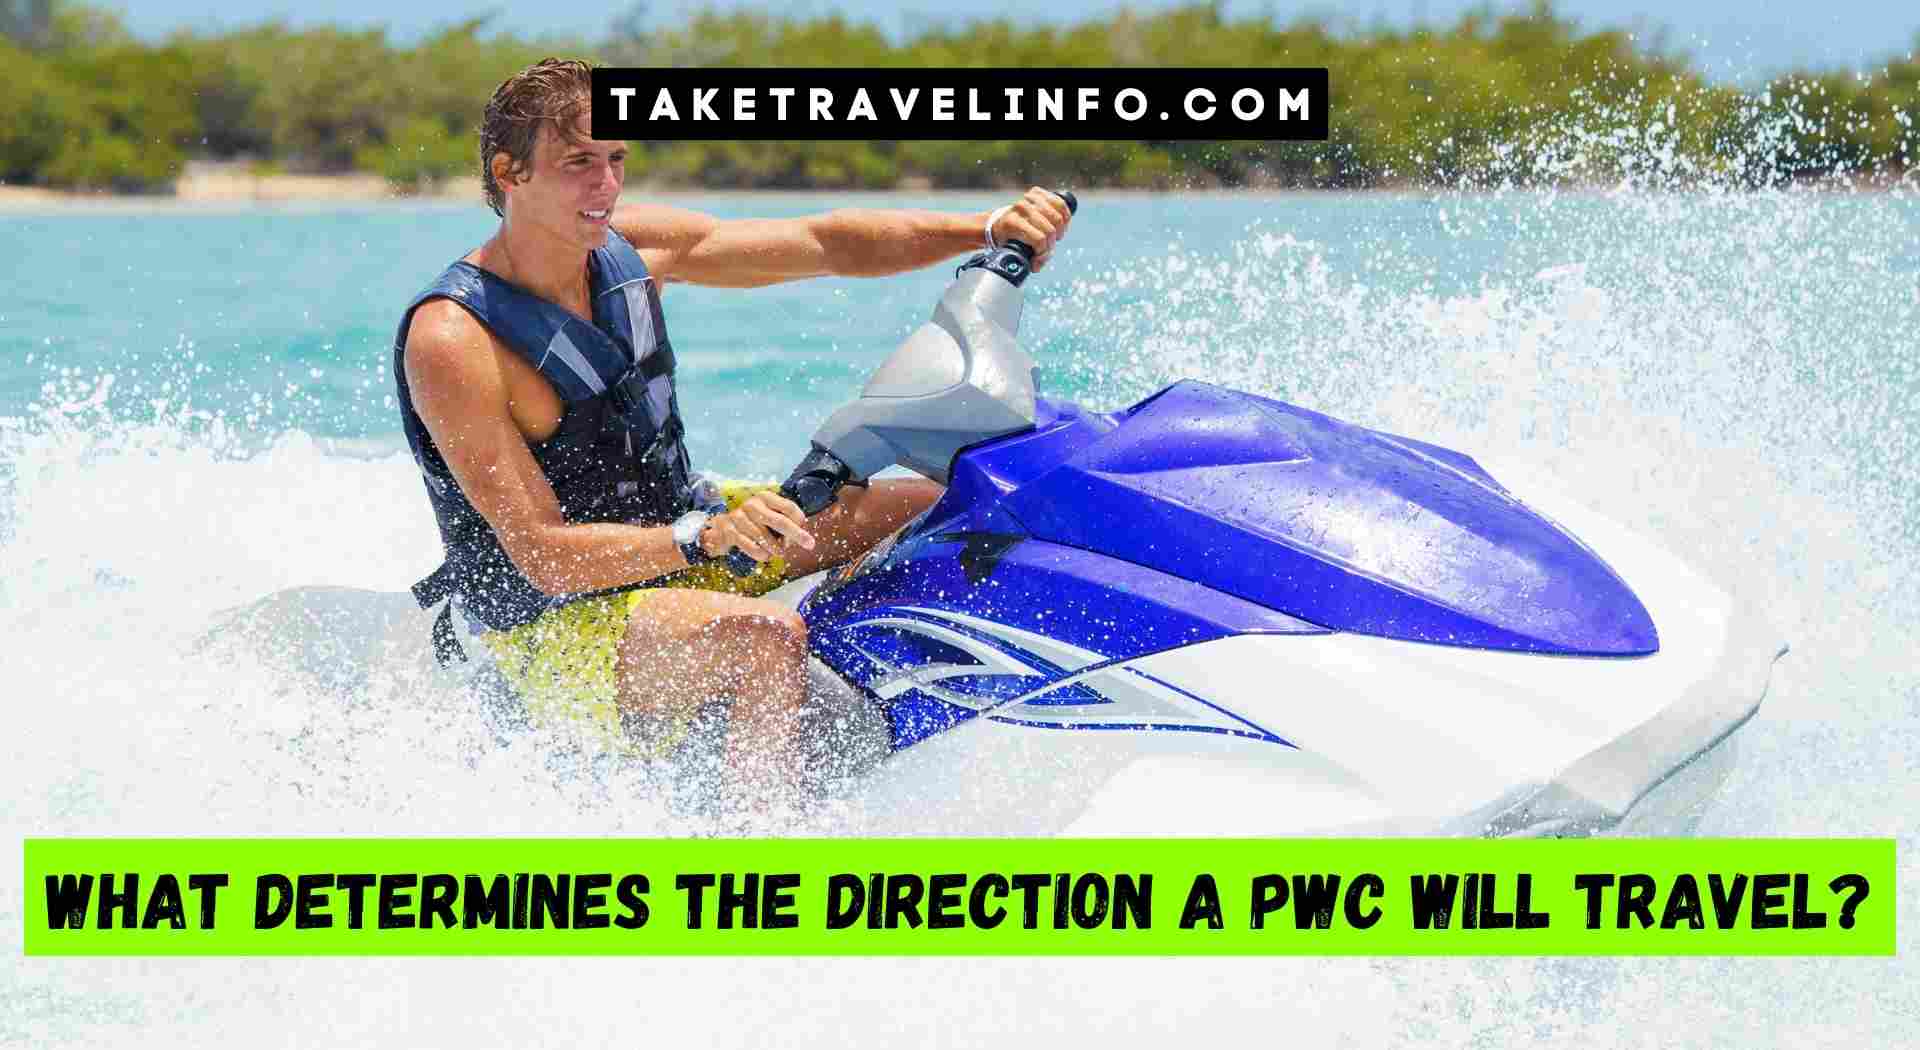 What Determines the Direction a PwC Will Travel?